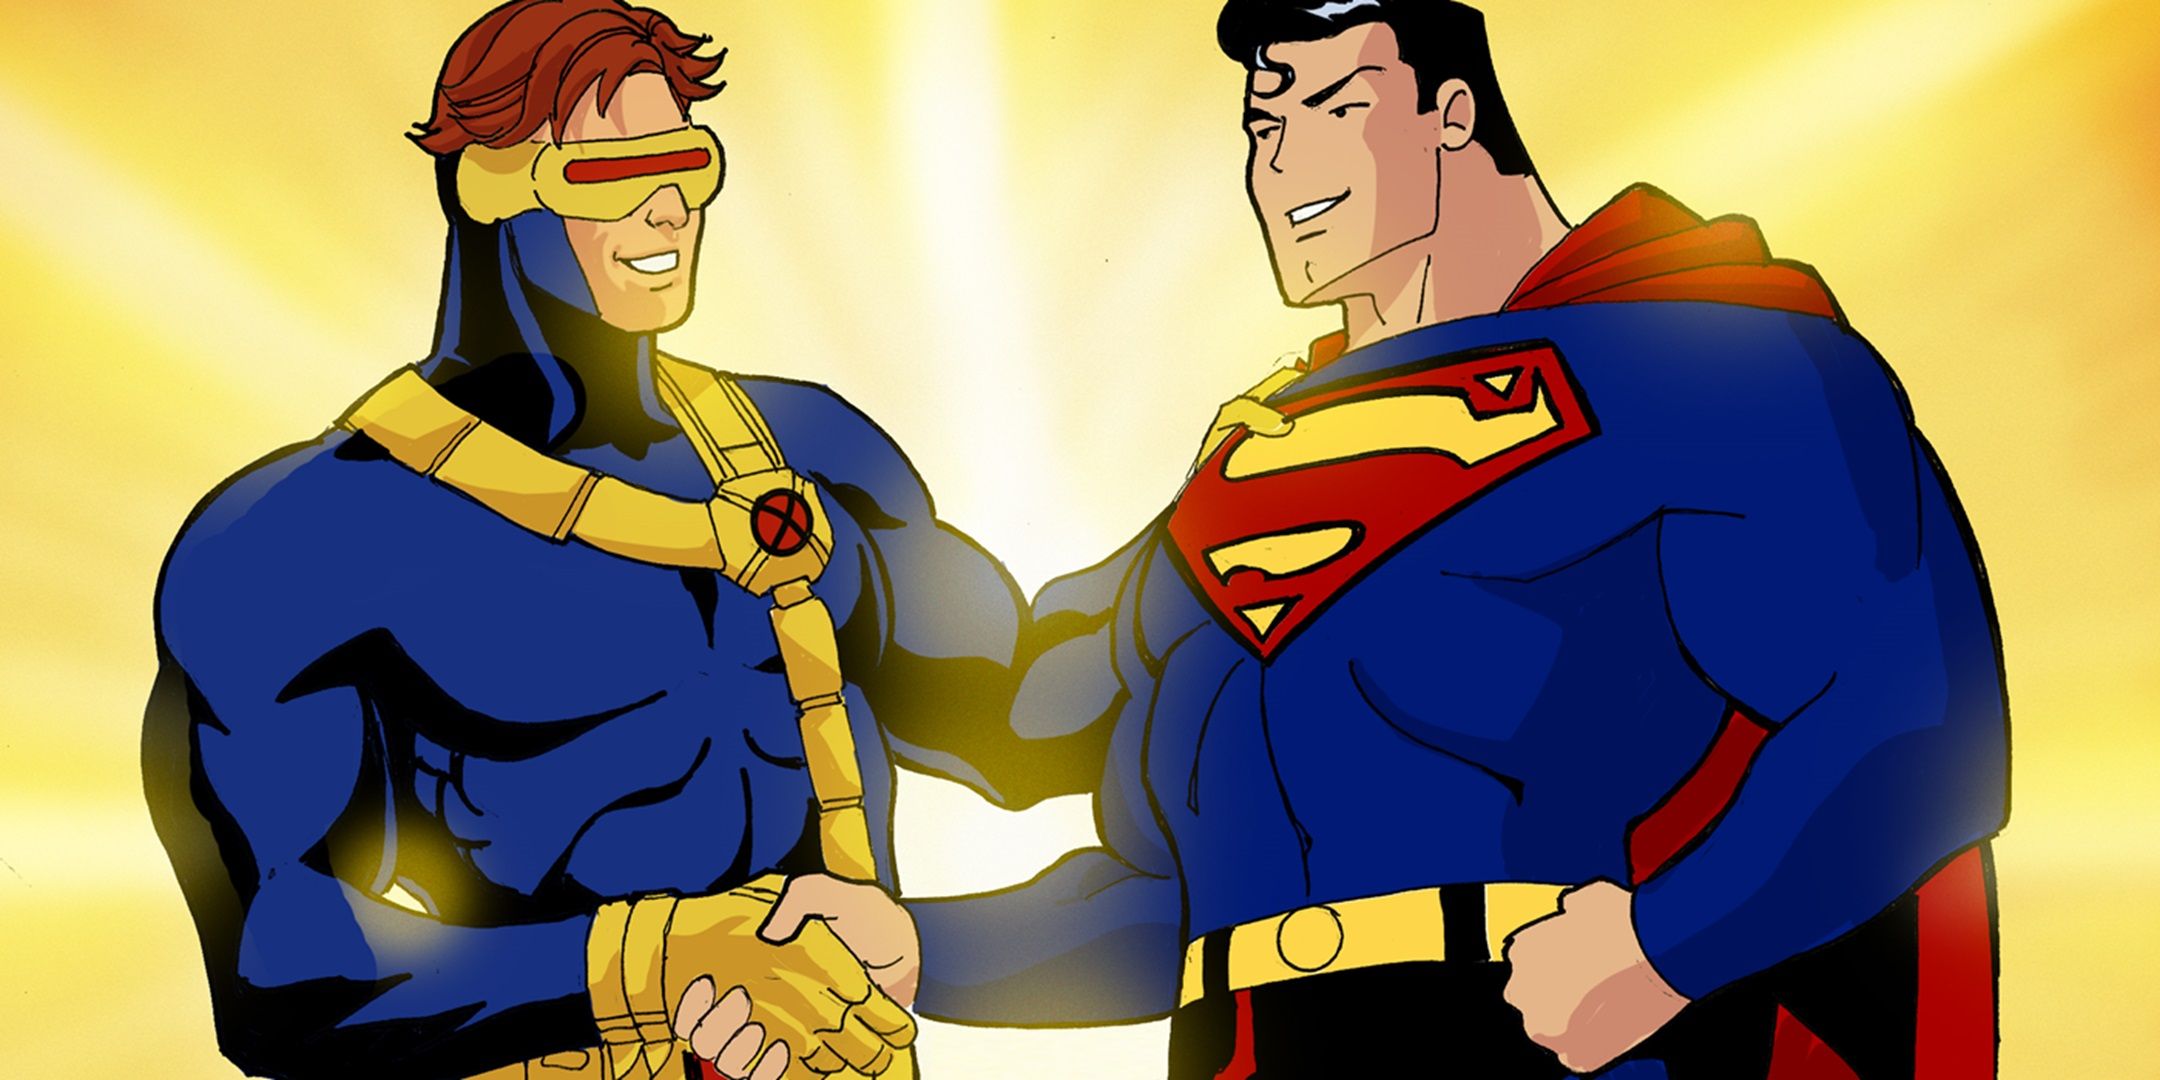 Cyclops shakes hands with Superman